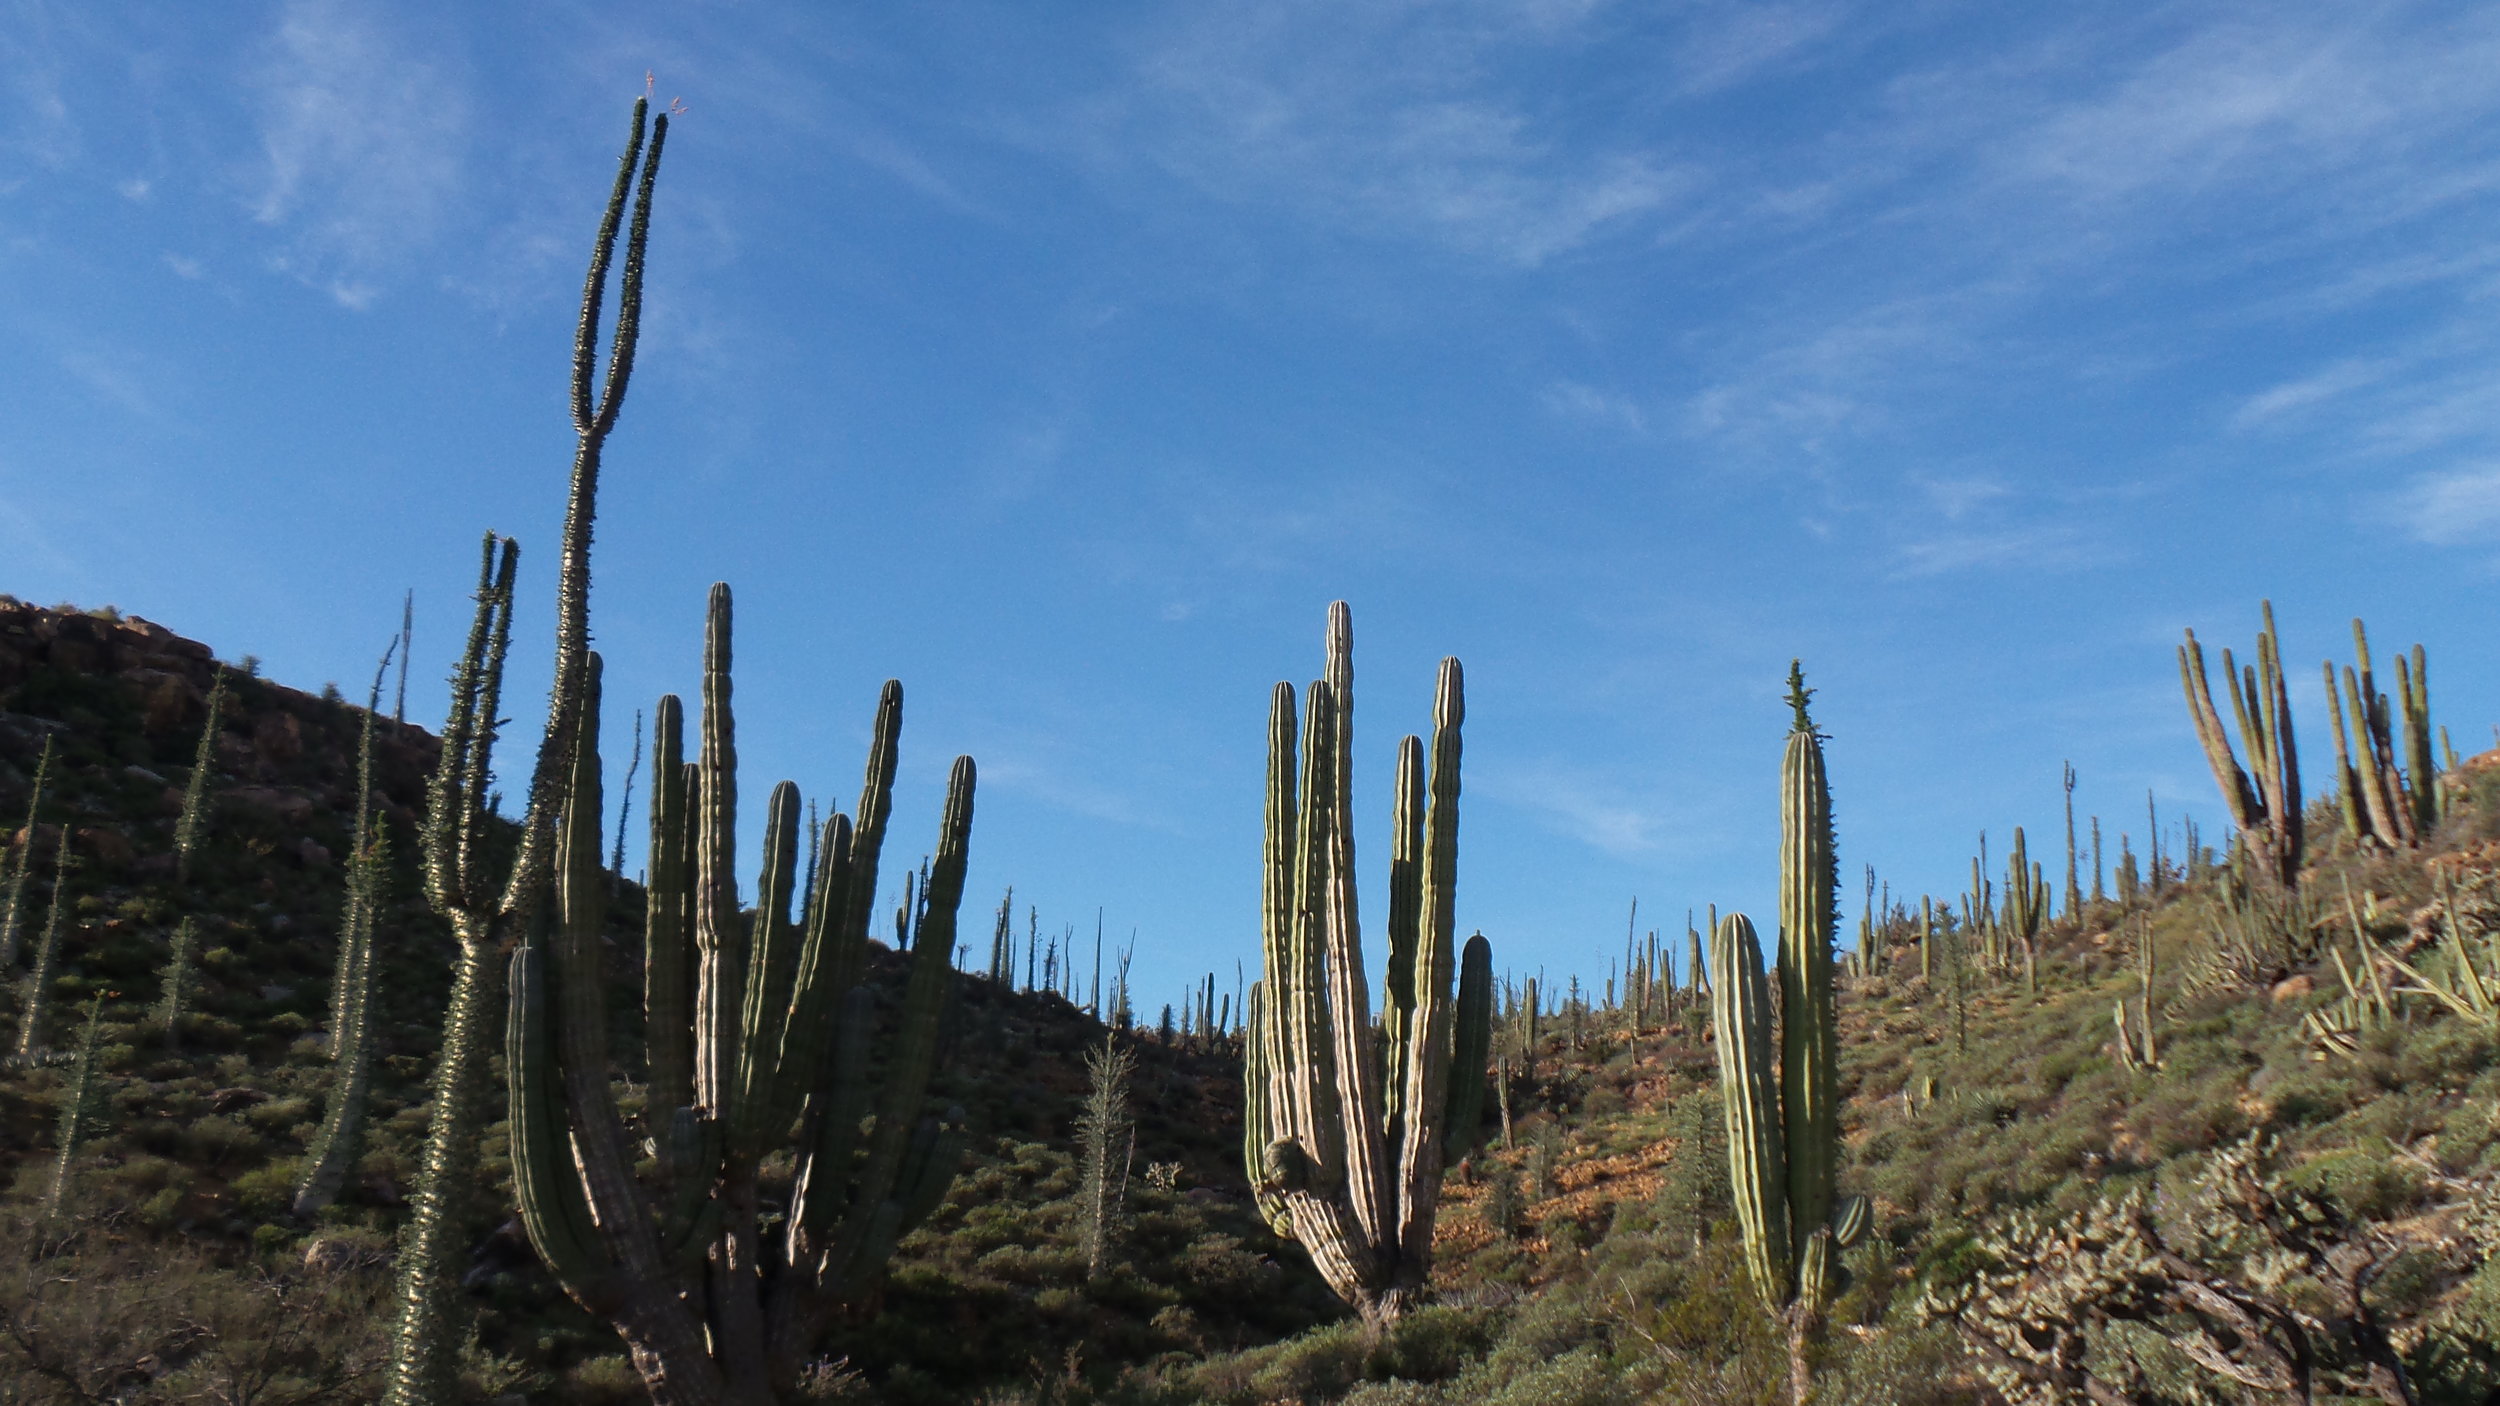 T Shirts Sun Shine is Setting Between Cactus Spines Magical Noon Landscape Wild 